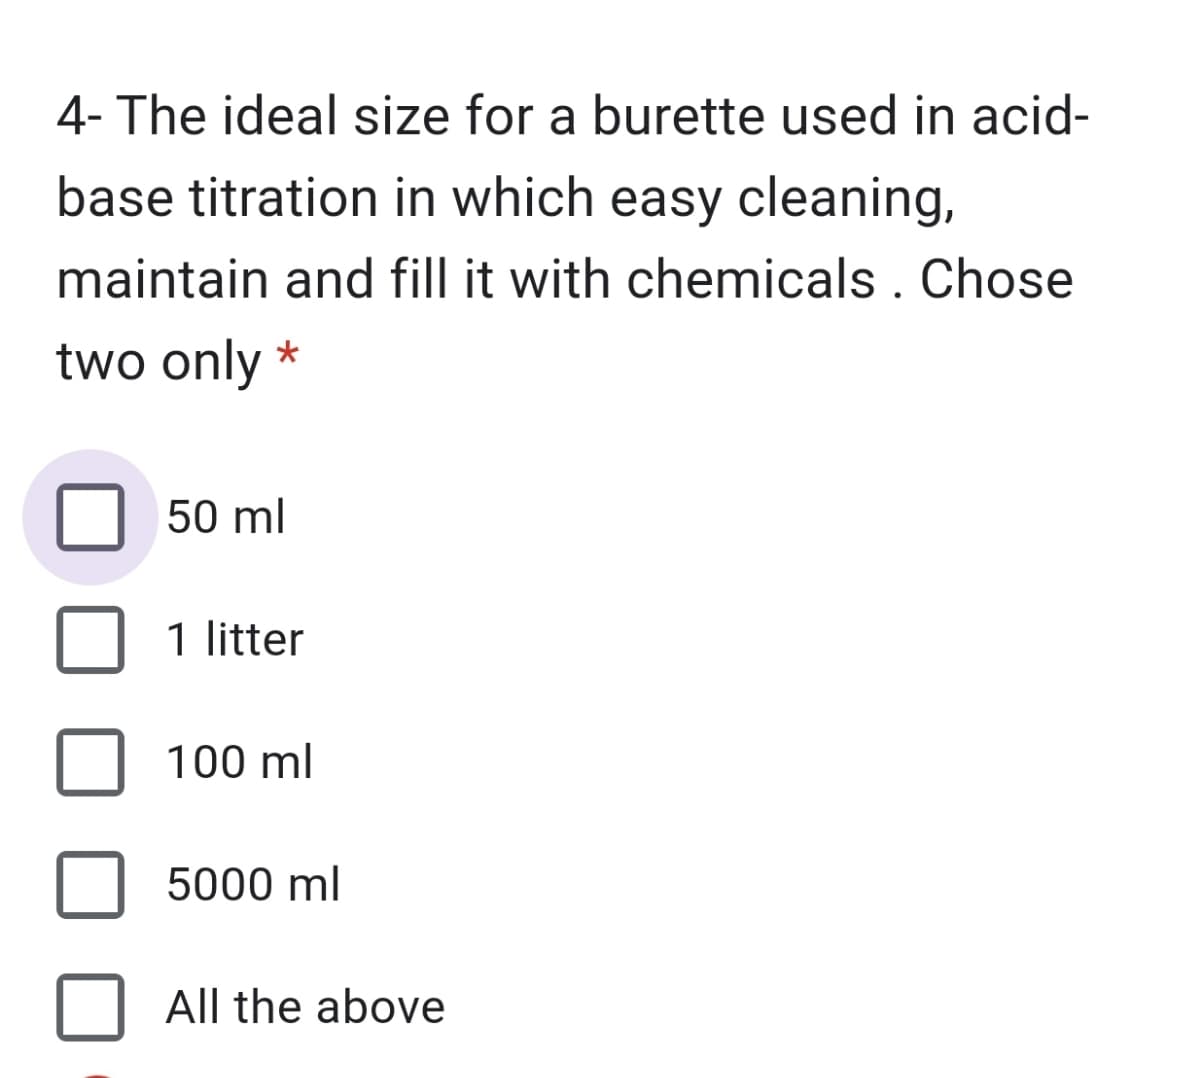 4- The ideal size for a burette used in acid-
base titration in which easy cleaning,
maintain and fill it with chemicals . Chose
two only *
50 ml
1 litter
100 ml
5000 ml
All the above
